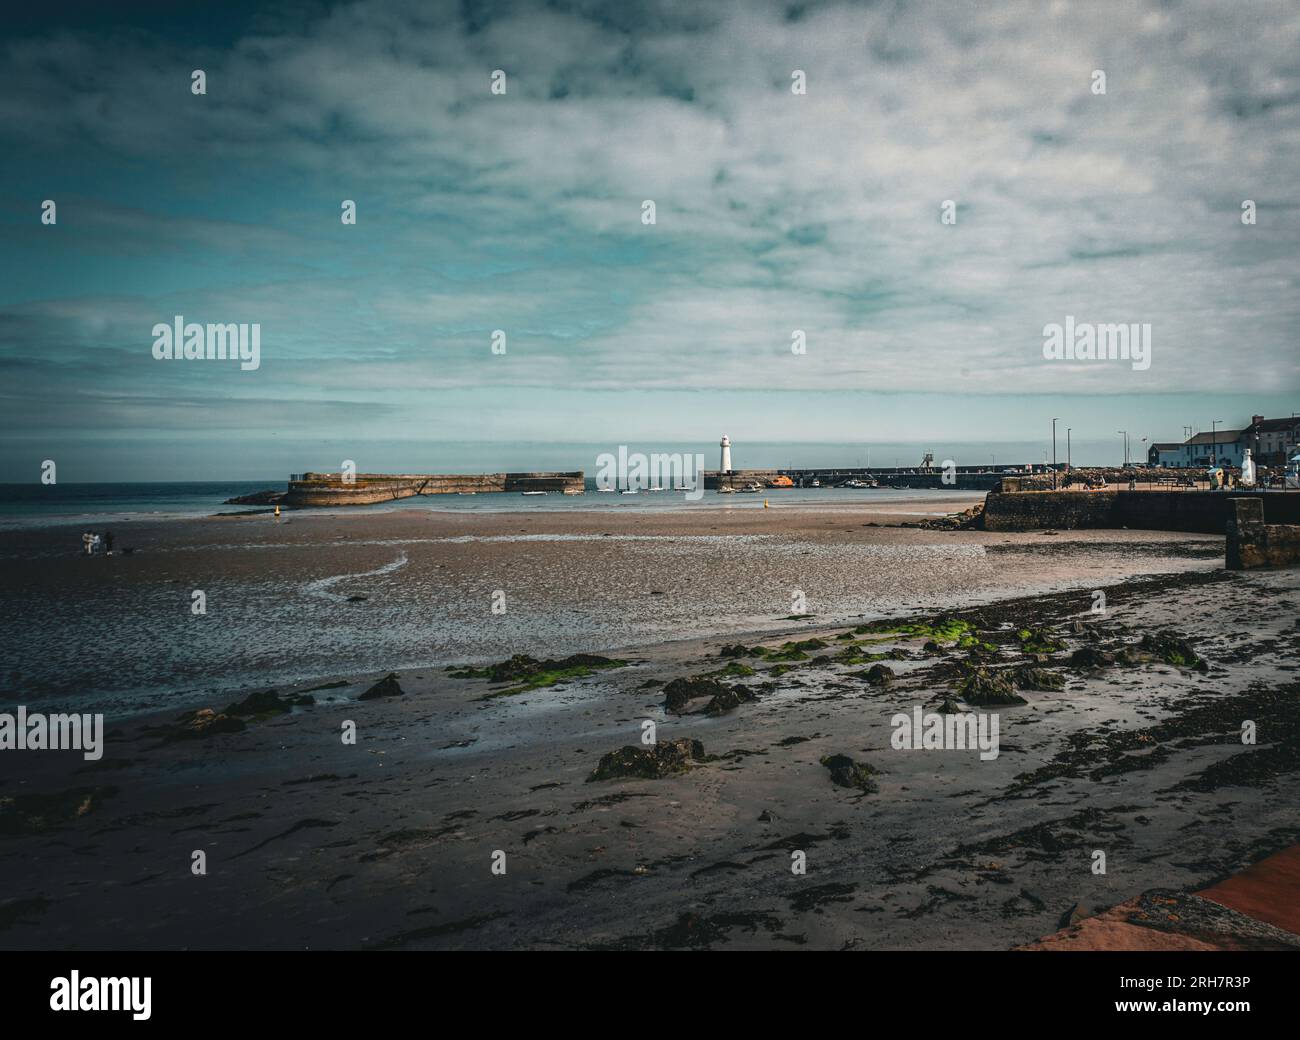 The beachfront in Donaghadee, County Down, Northern Ireland with the well known landmark white lighthouse in the distance. Stock Photo